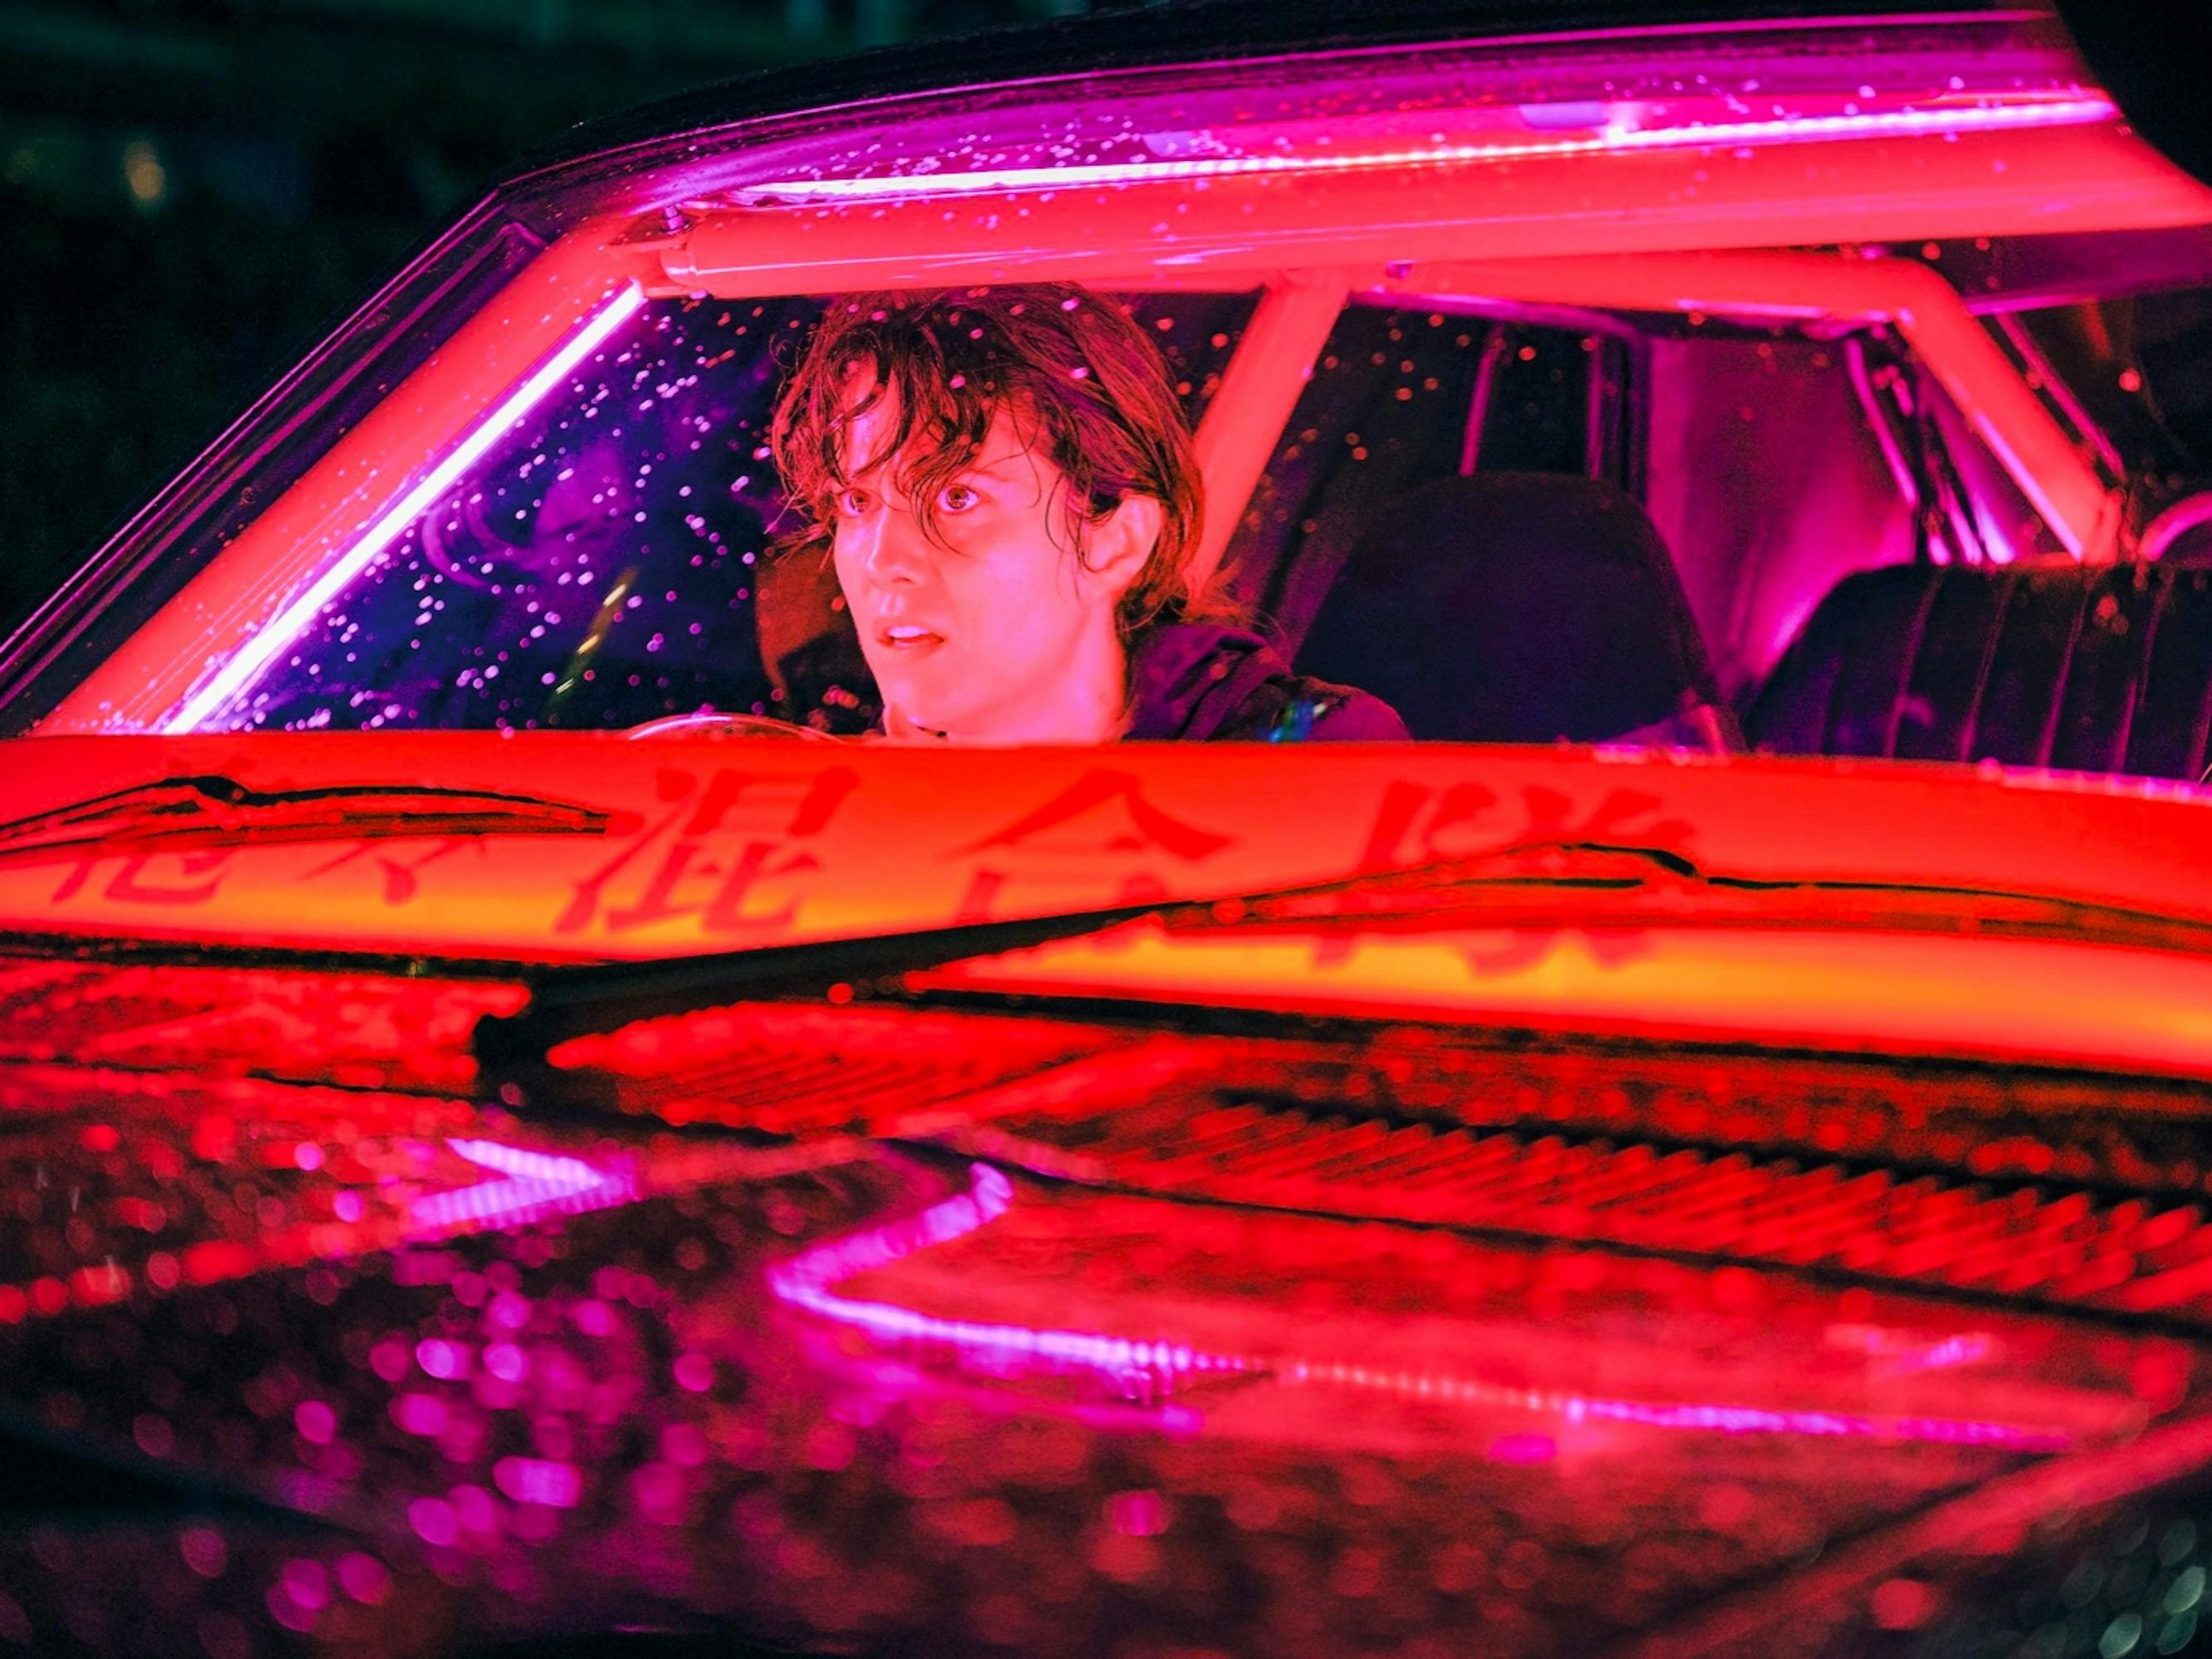 Kate (Mary Elizabeth Winstead) sits in a car lit by pink and orange neon light.